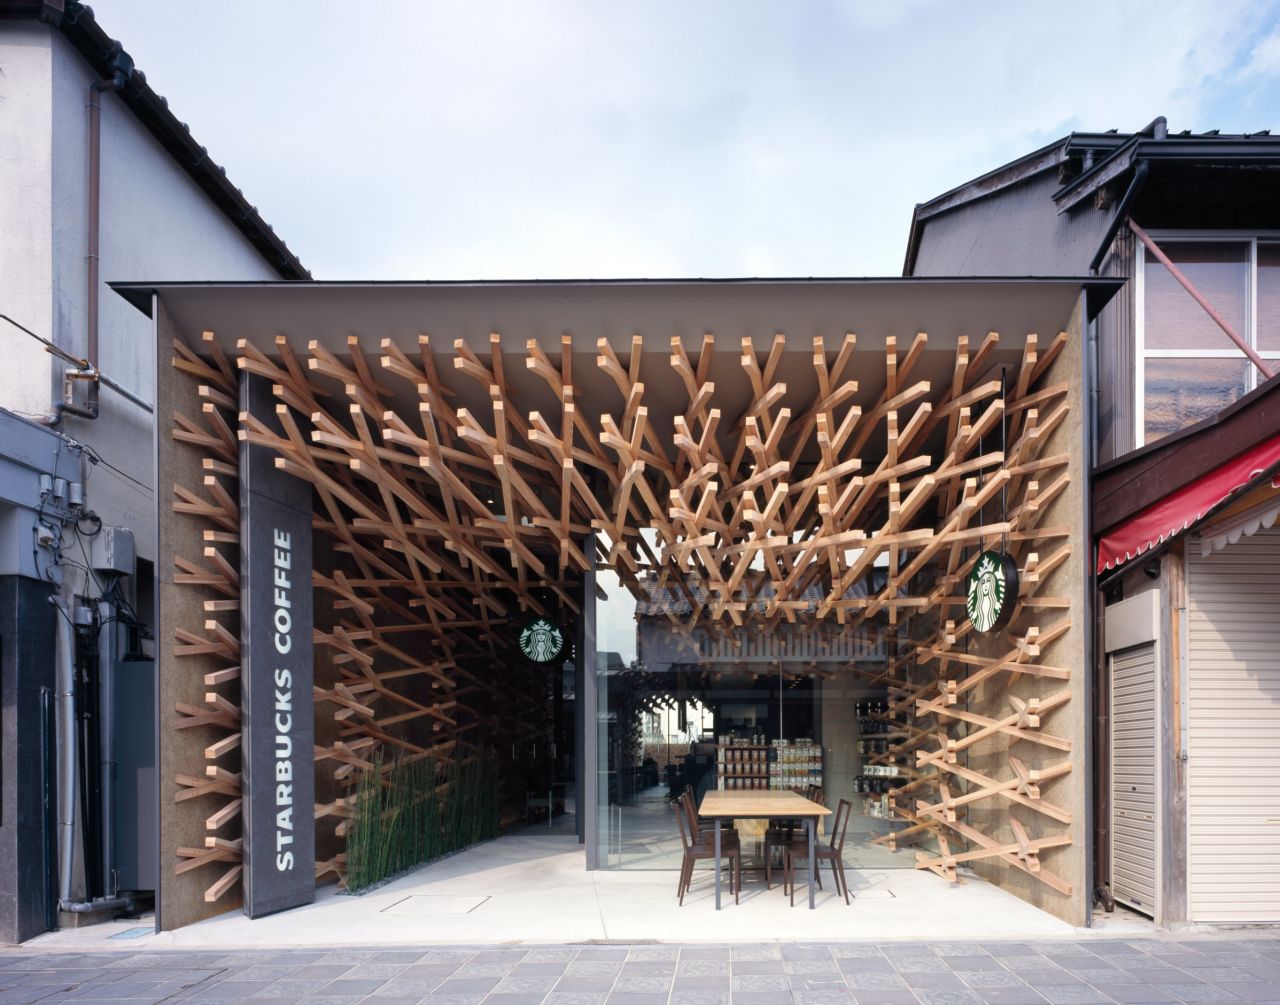 Japan's no stranger to eye-catching Starbucks. Starbucks Dazaifu, in the southwestern port city of Fukuoka was designed by Japanese architects Kengo Kuma and Associate. It's located in a historic pedestrian street that leads to the Dazaifu Tenmangu Shrine, which welcomes about 2 million visitors every year. 